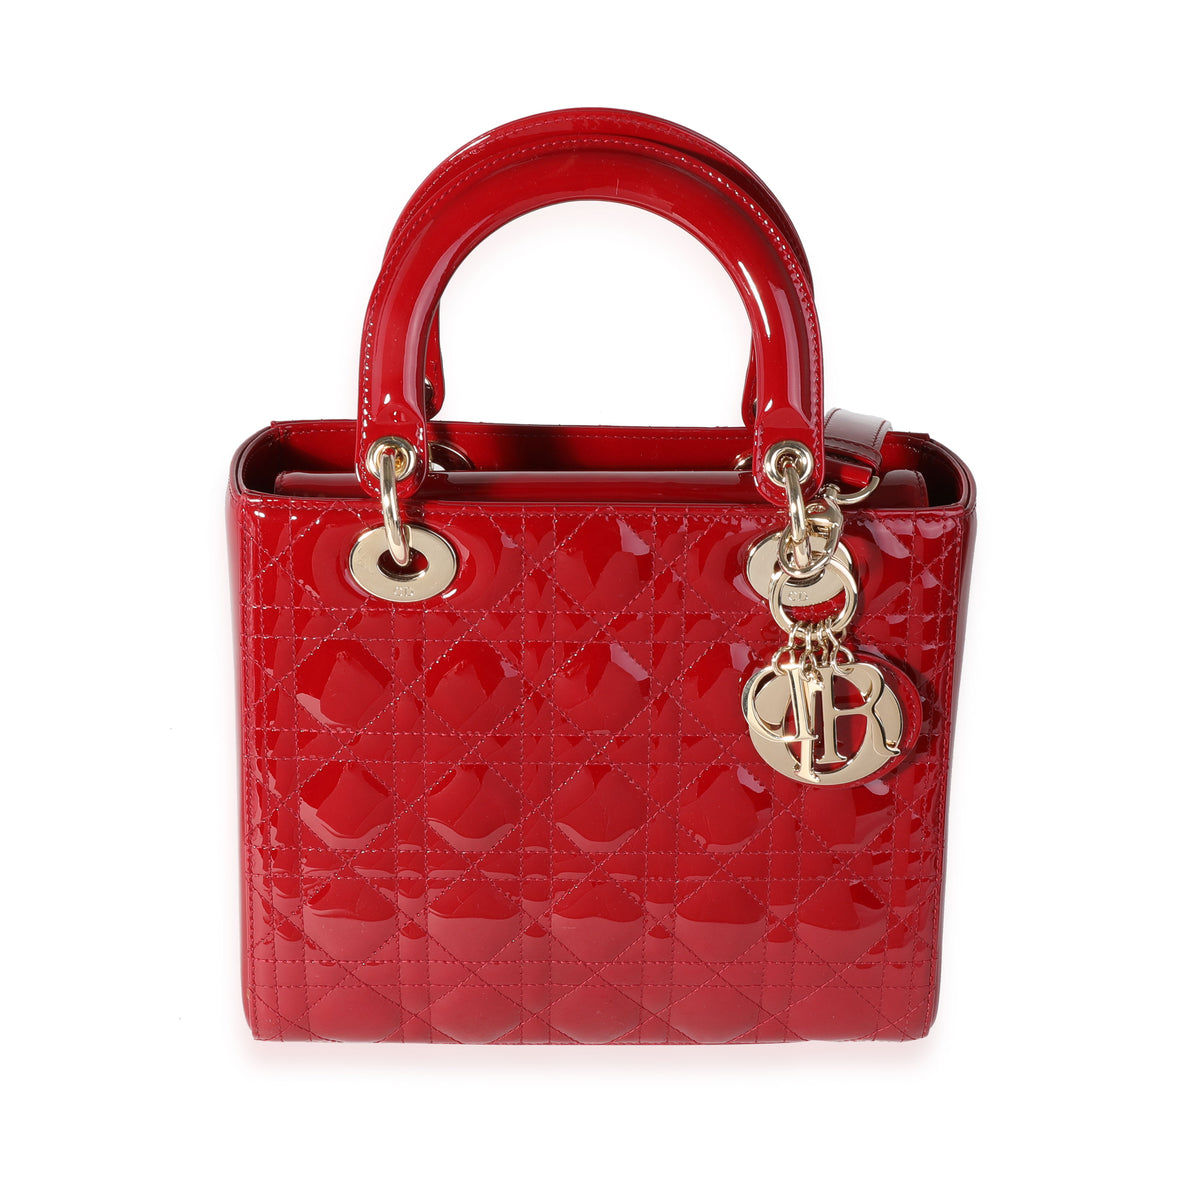 Bag of the Day 11 DIOR Lady Dior Patent Red Leather medium bagoftheday  ladydior  YouTube